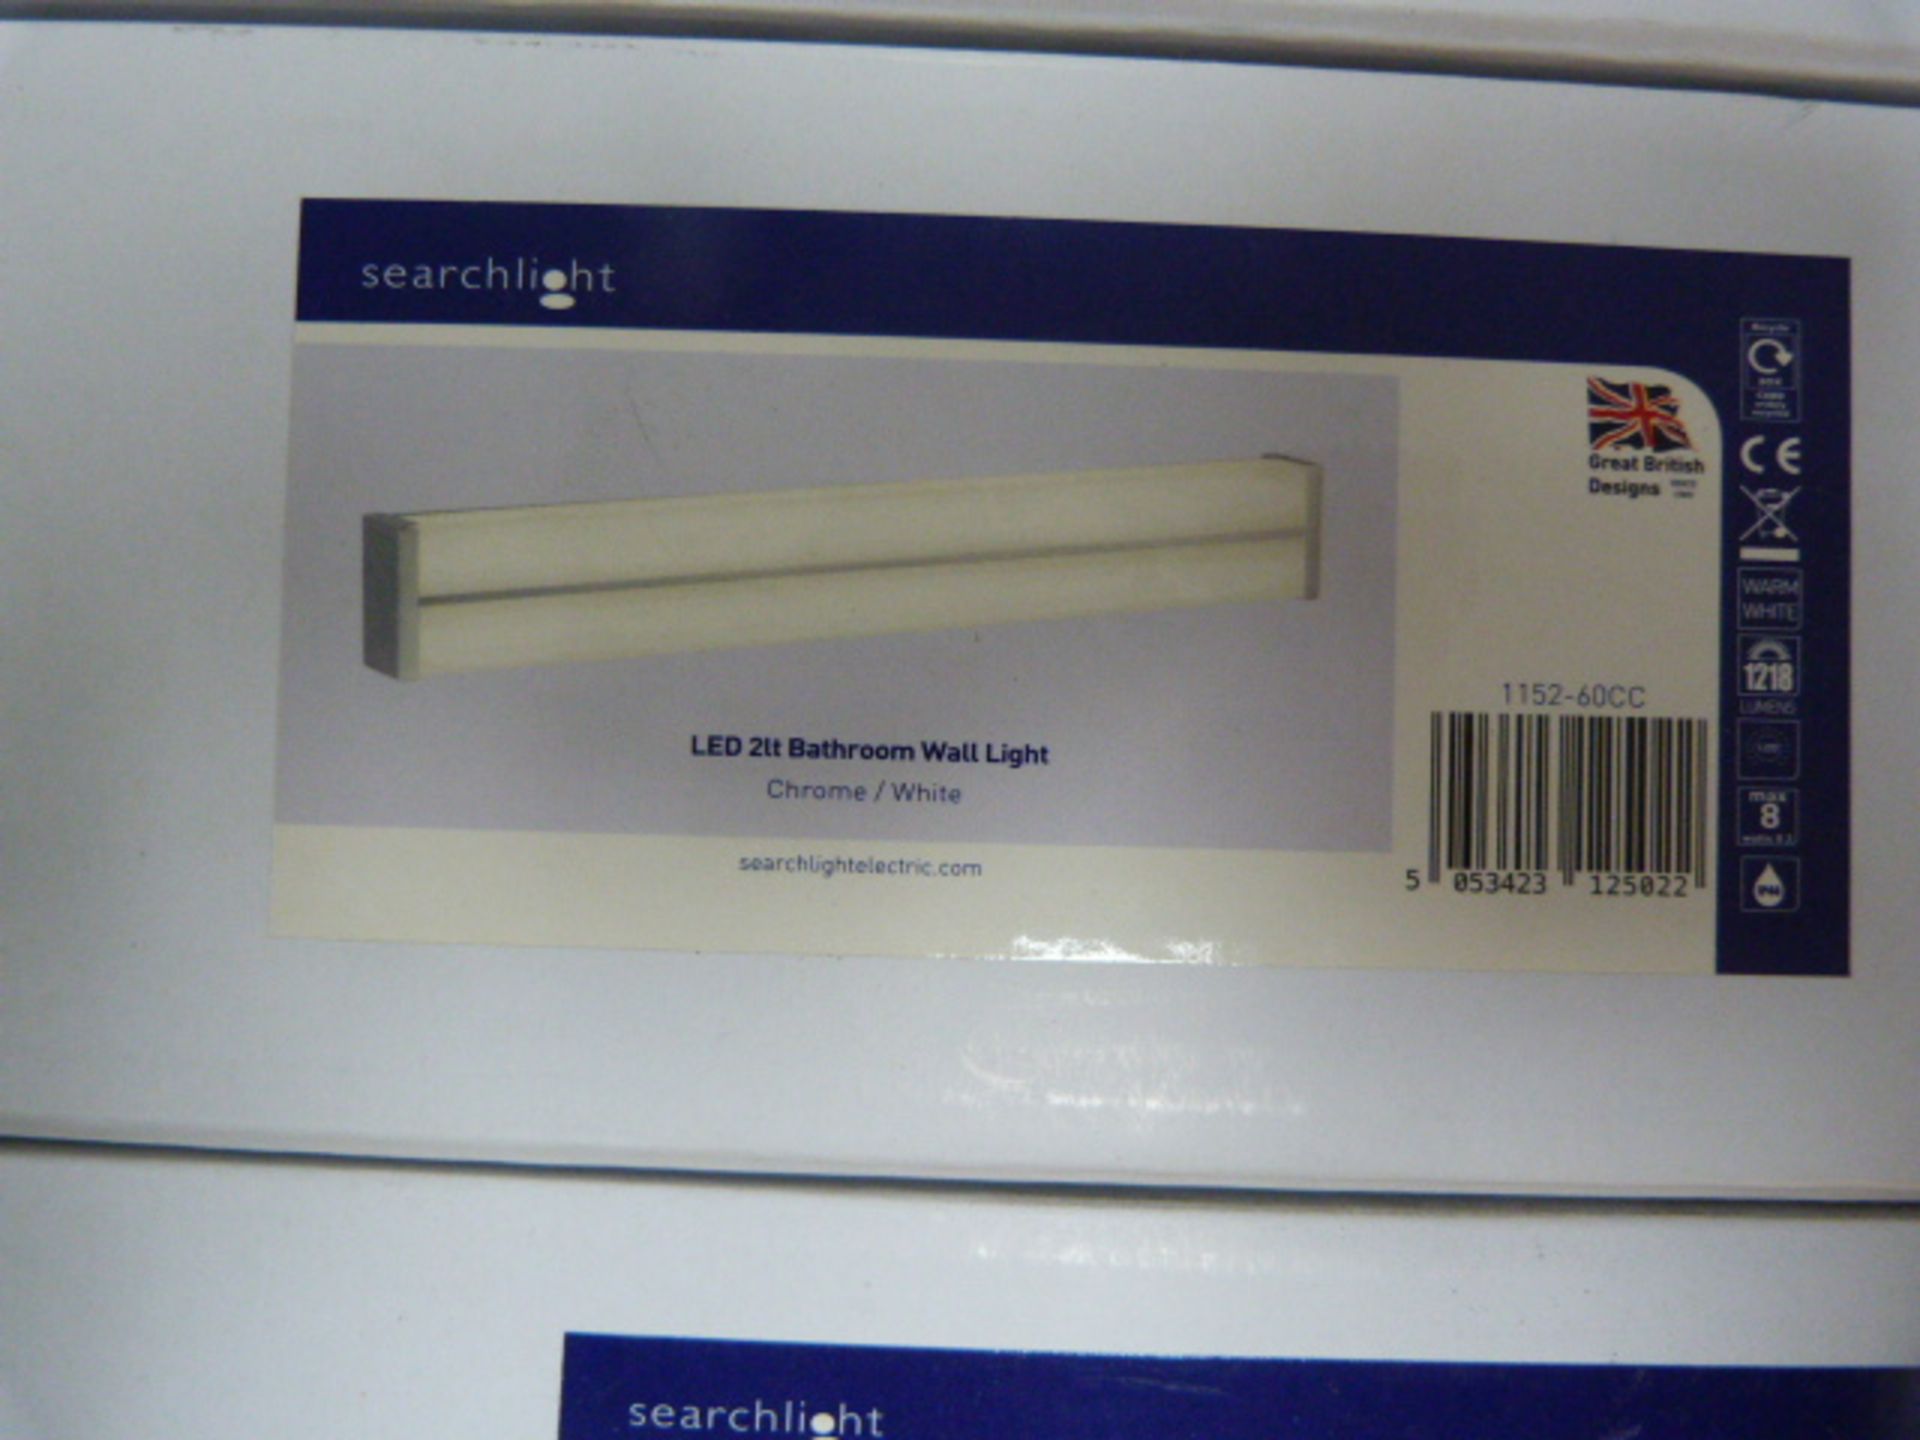 *LED 2ft Bathroom Wall Light in Chrome and White